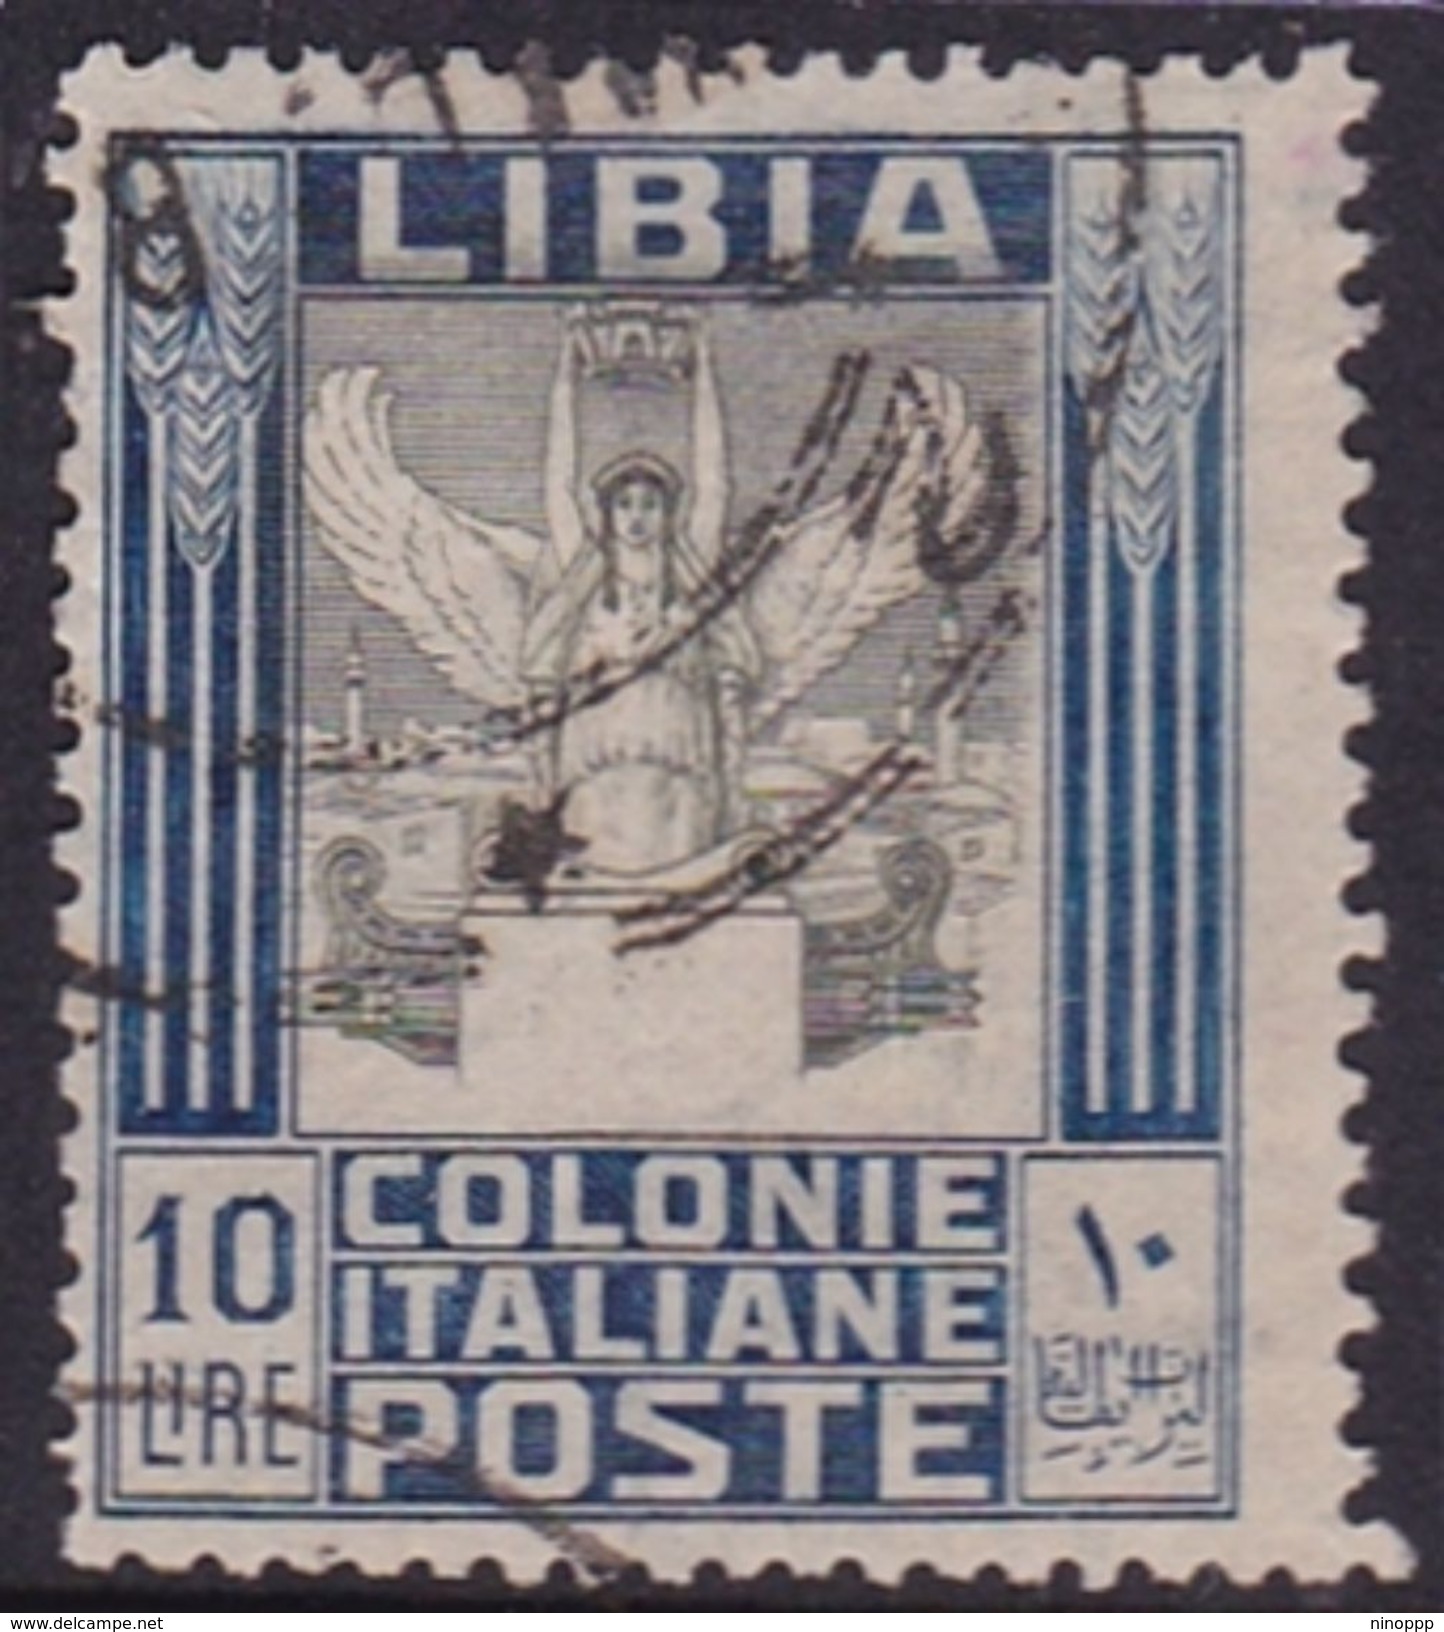 Italy-Colonies And Territories-Libya S 32 1921 ,Pictorials, 10 Lira Victory,used - Libya